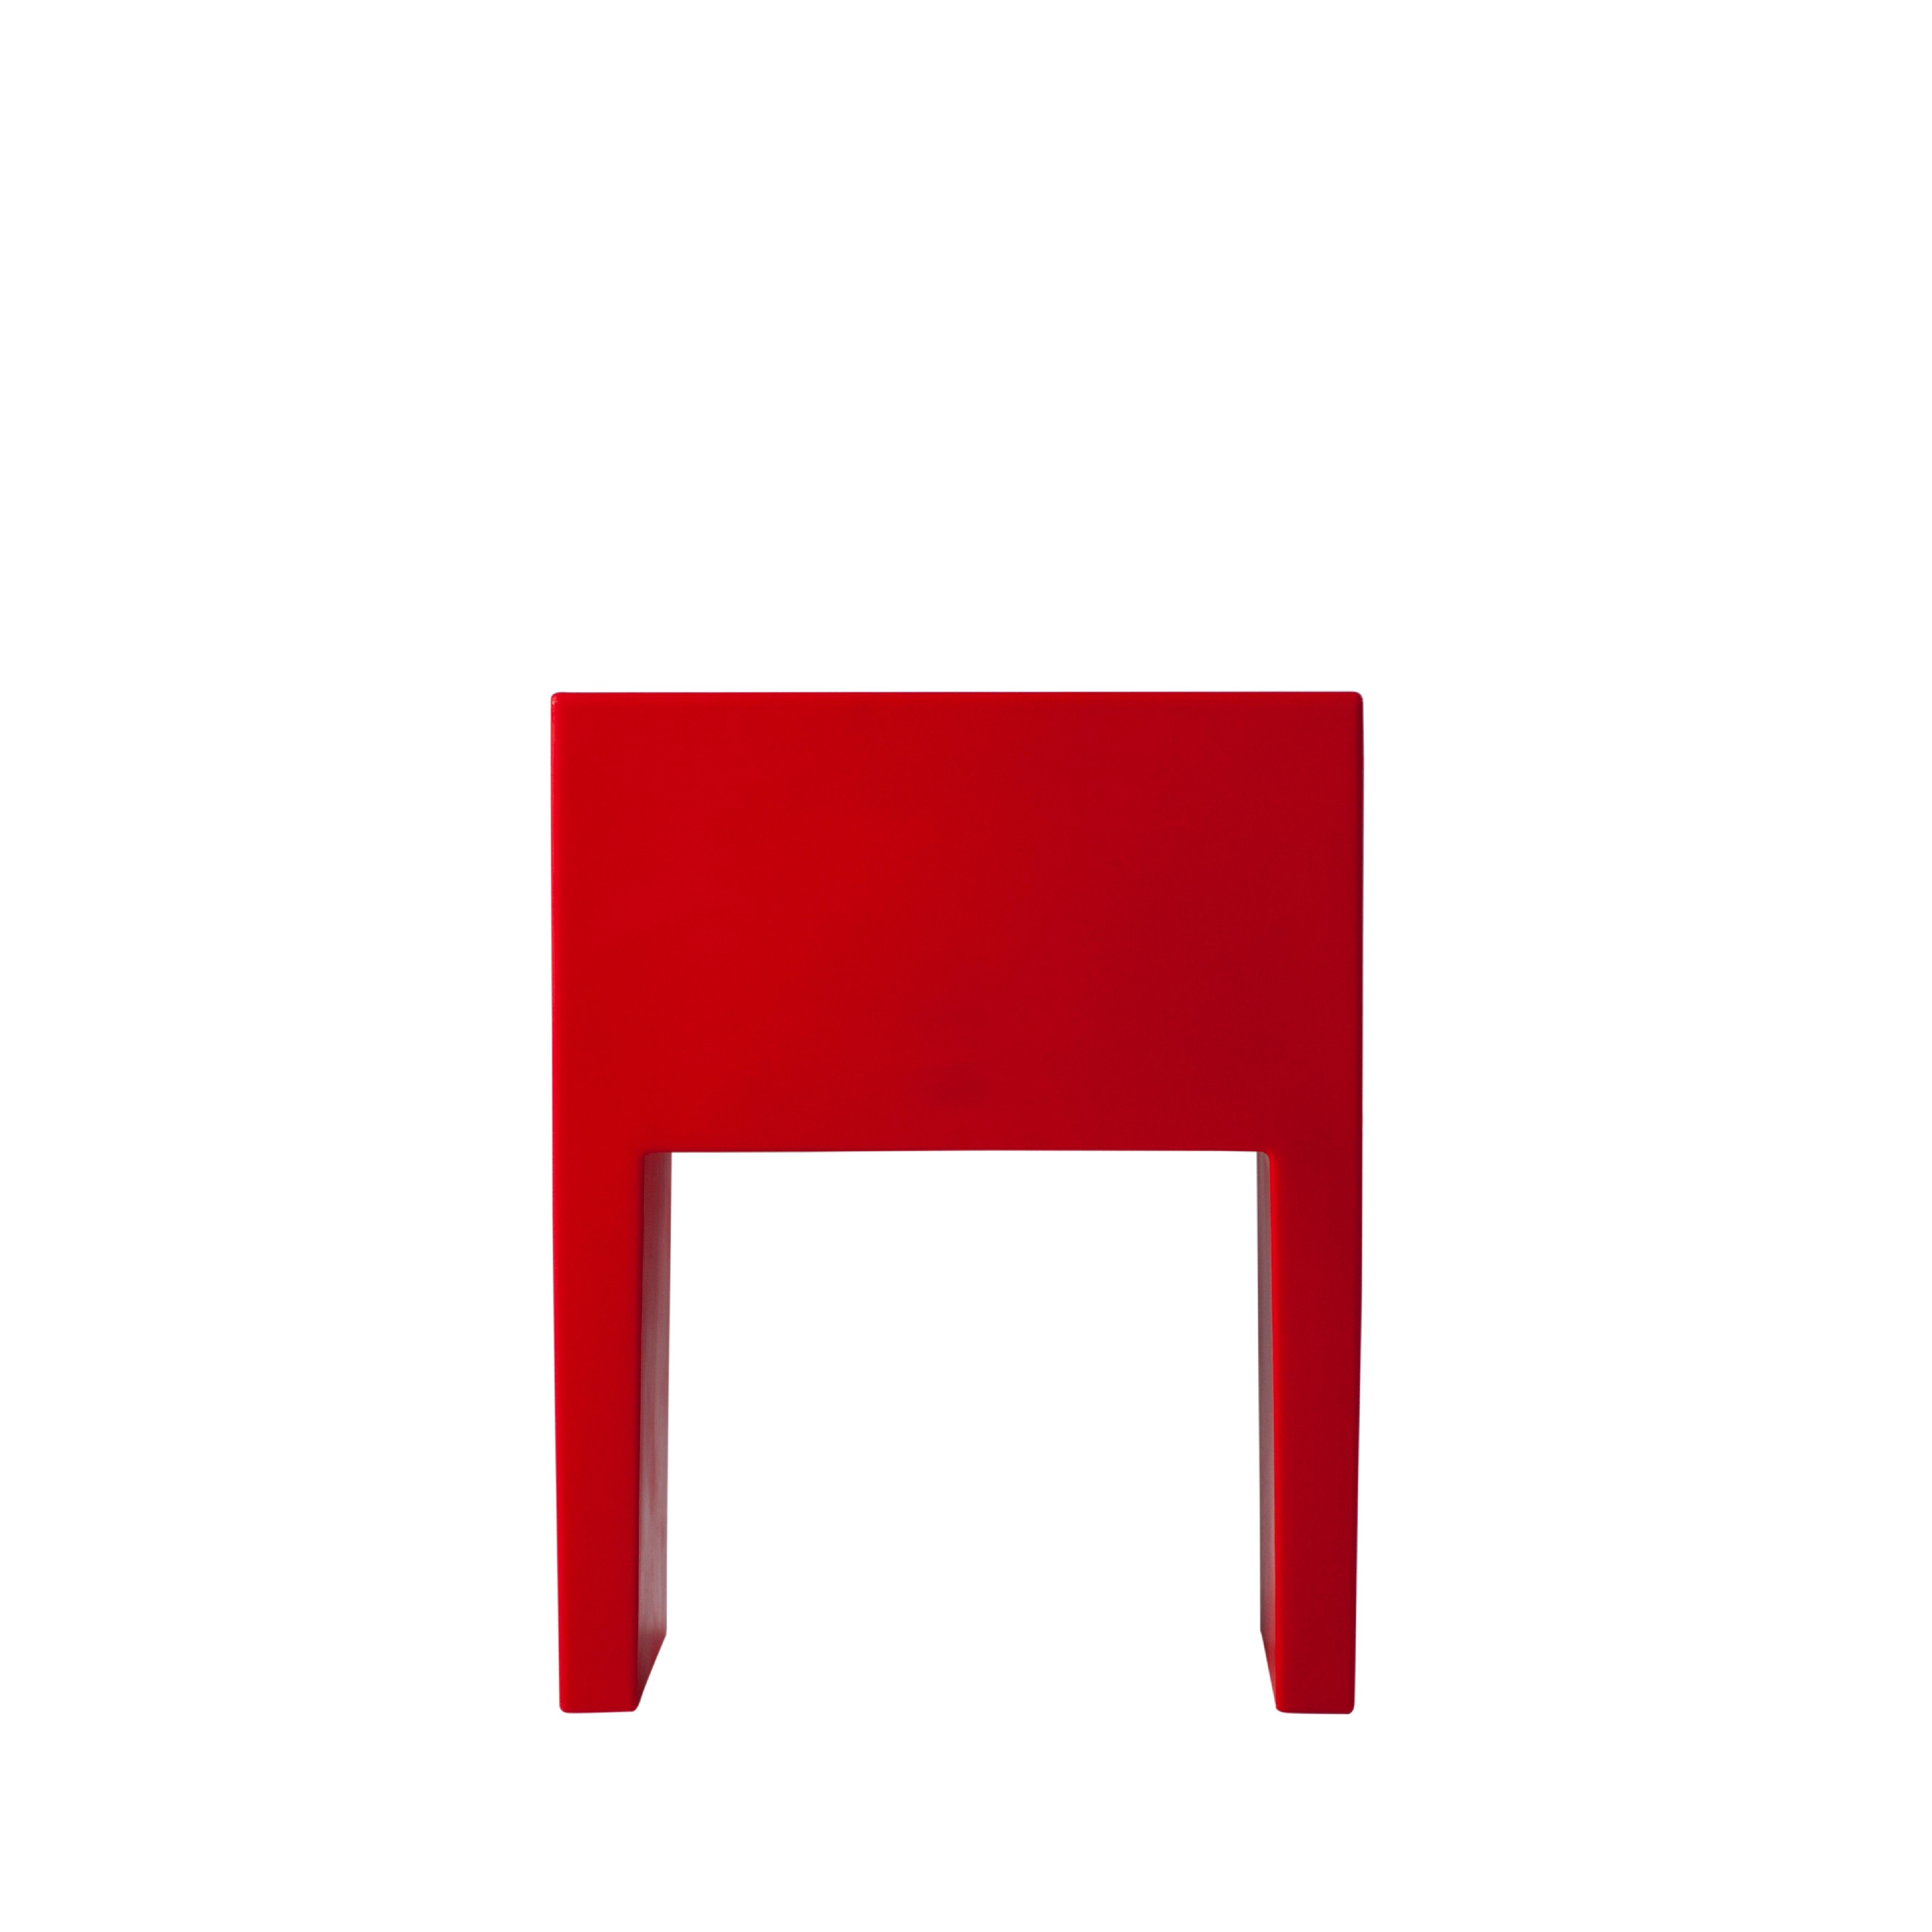 Angolo Retto is a chair with an extremely compact design: its dimensions and its essential shape make it an ideal product for both contract and private homes. Angolo Retto customizes outdoor and indoor areas with a touch of colour, both in standard